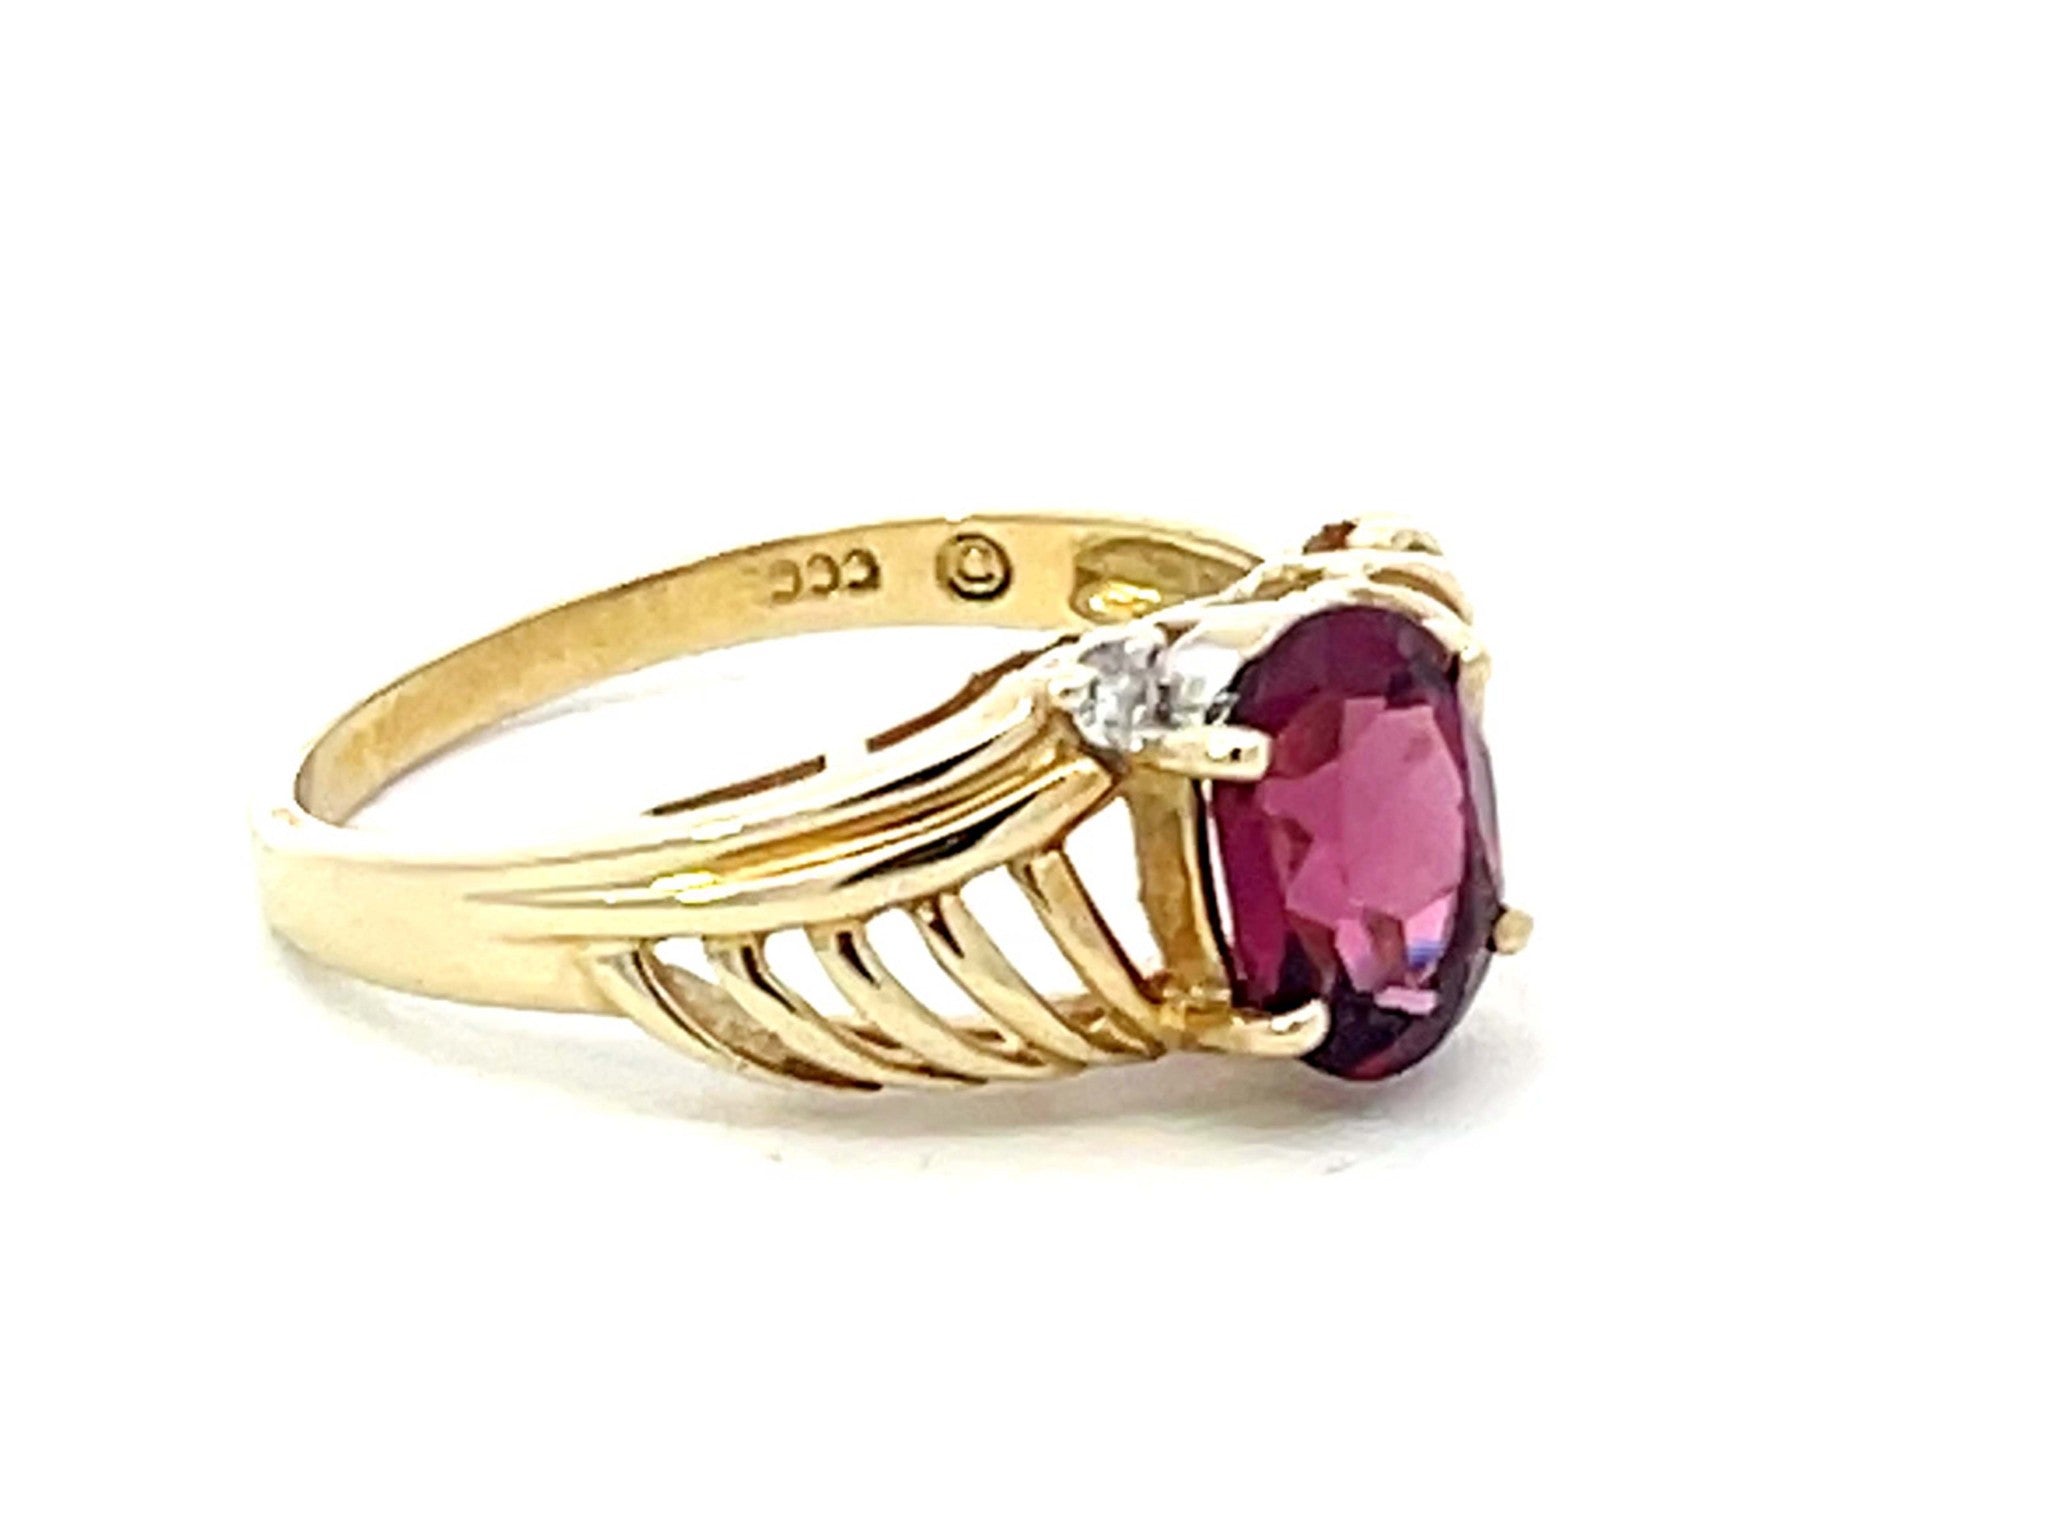 Red Rubellite Garnet and Diamond Ring in 14k Yellow Gold